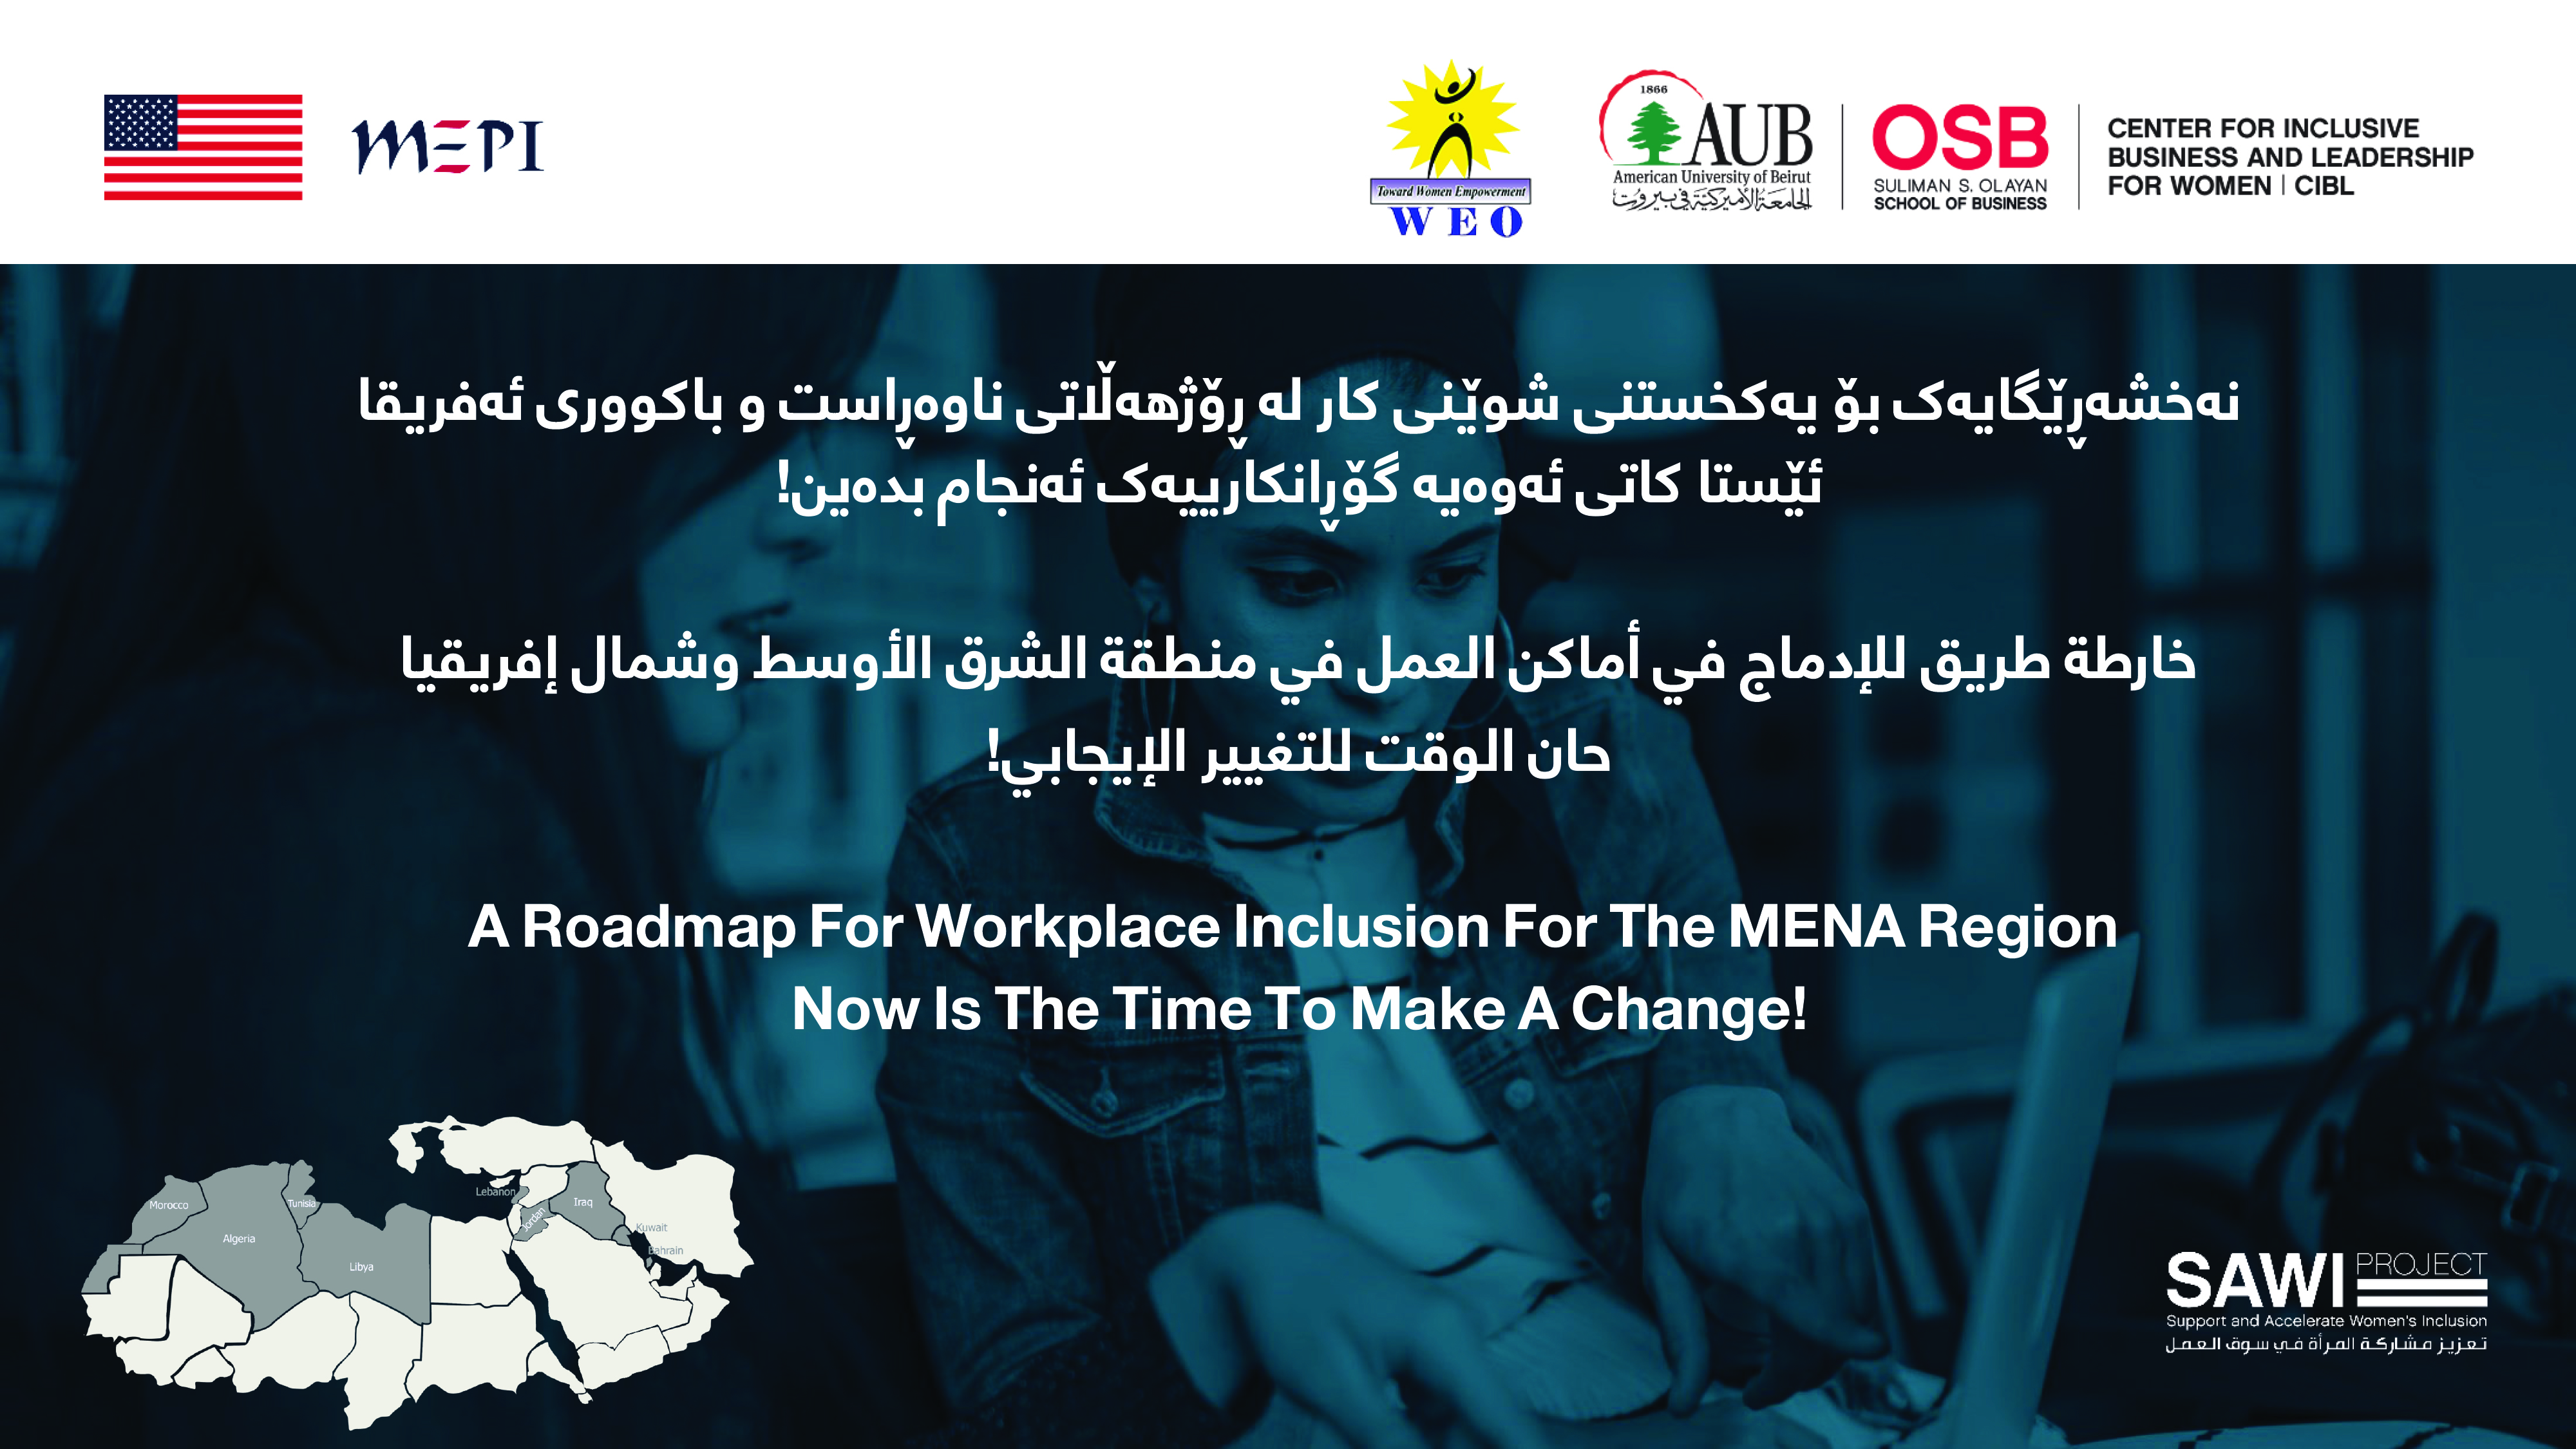 A Roadmap For Workplace Inclusion For The MENA Region